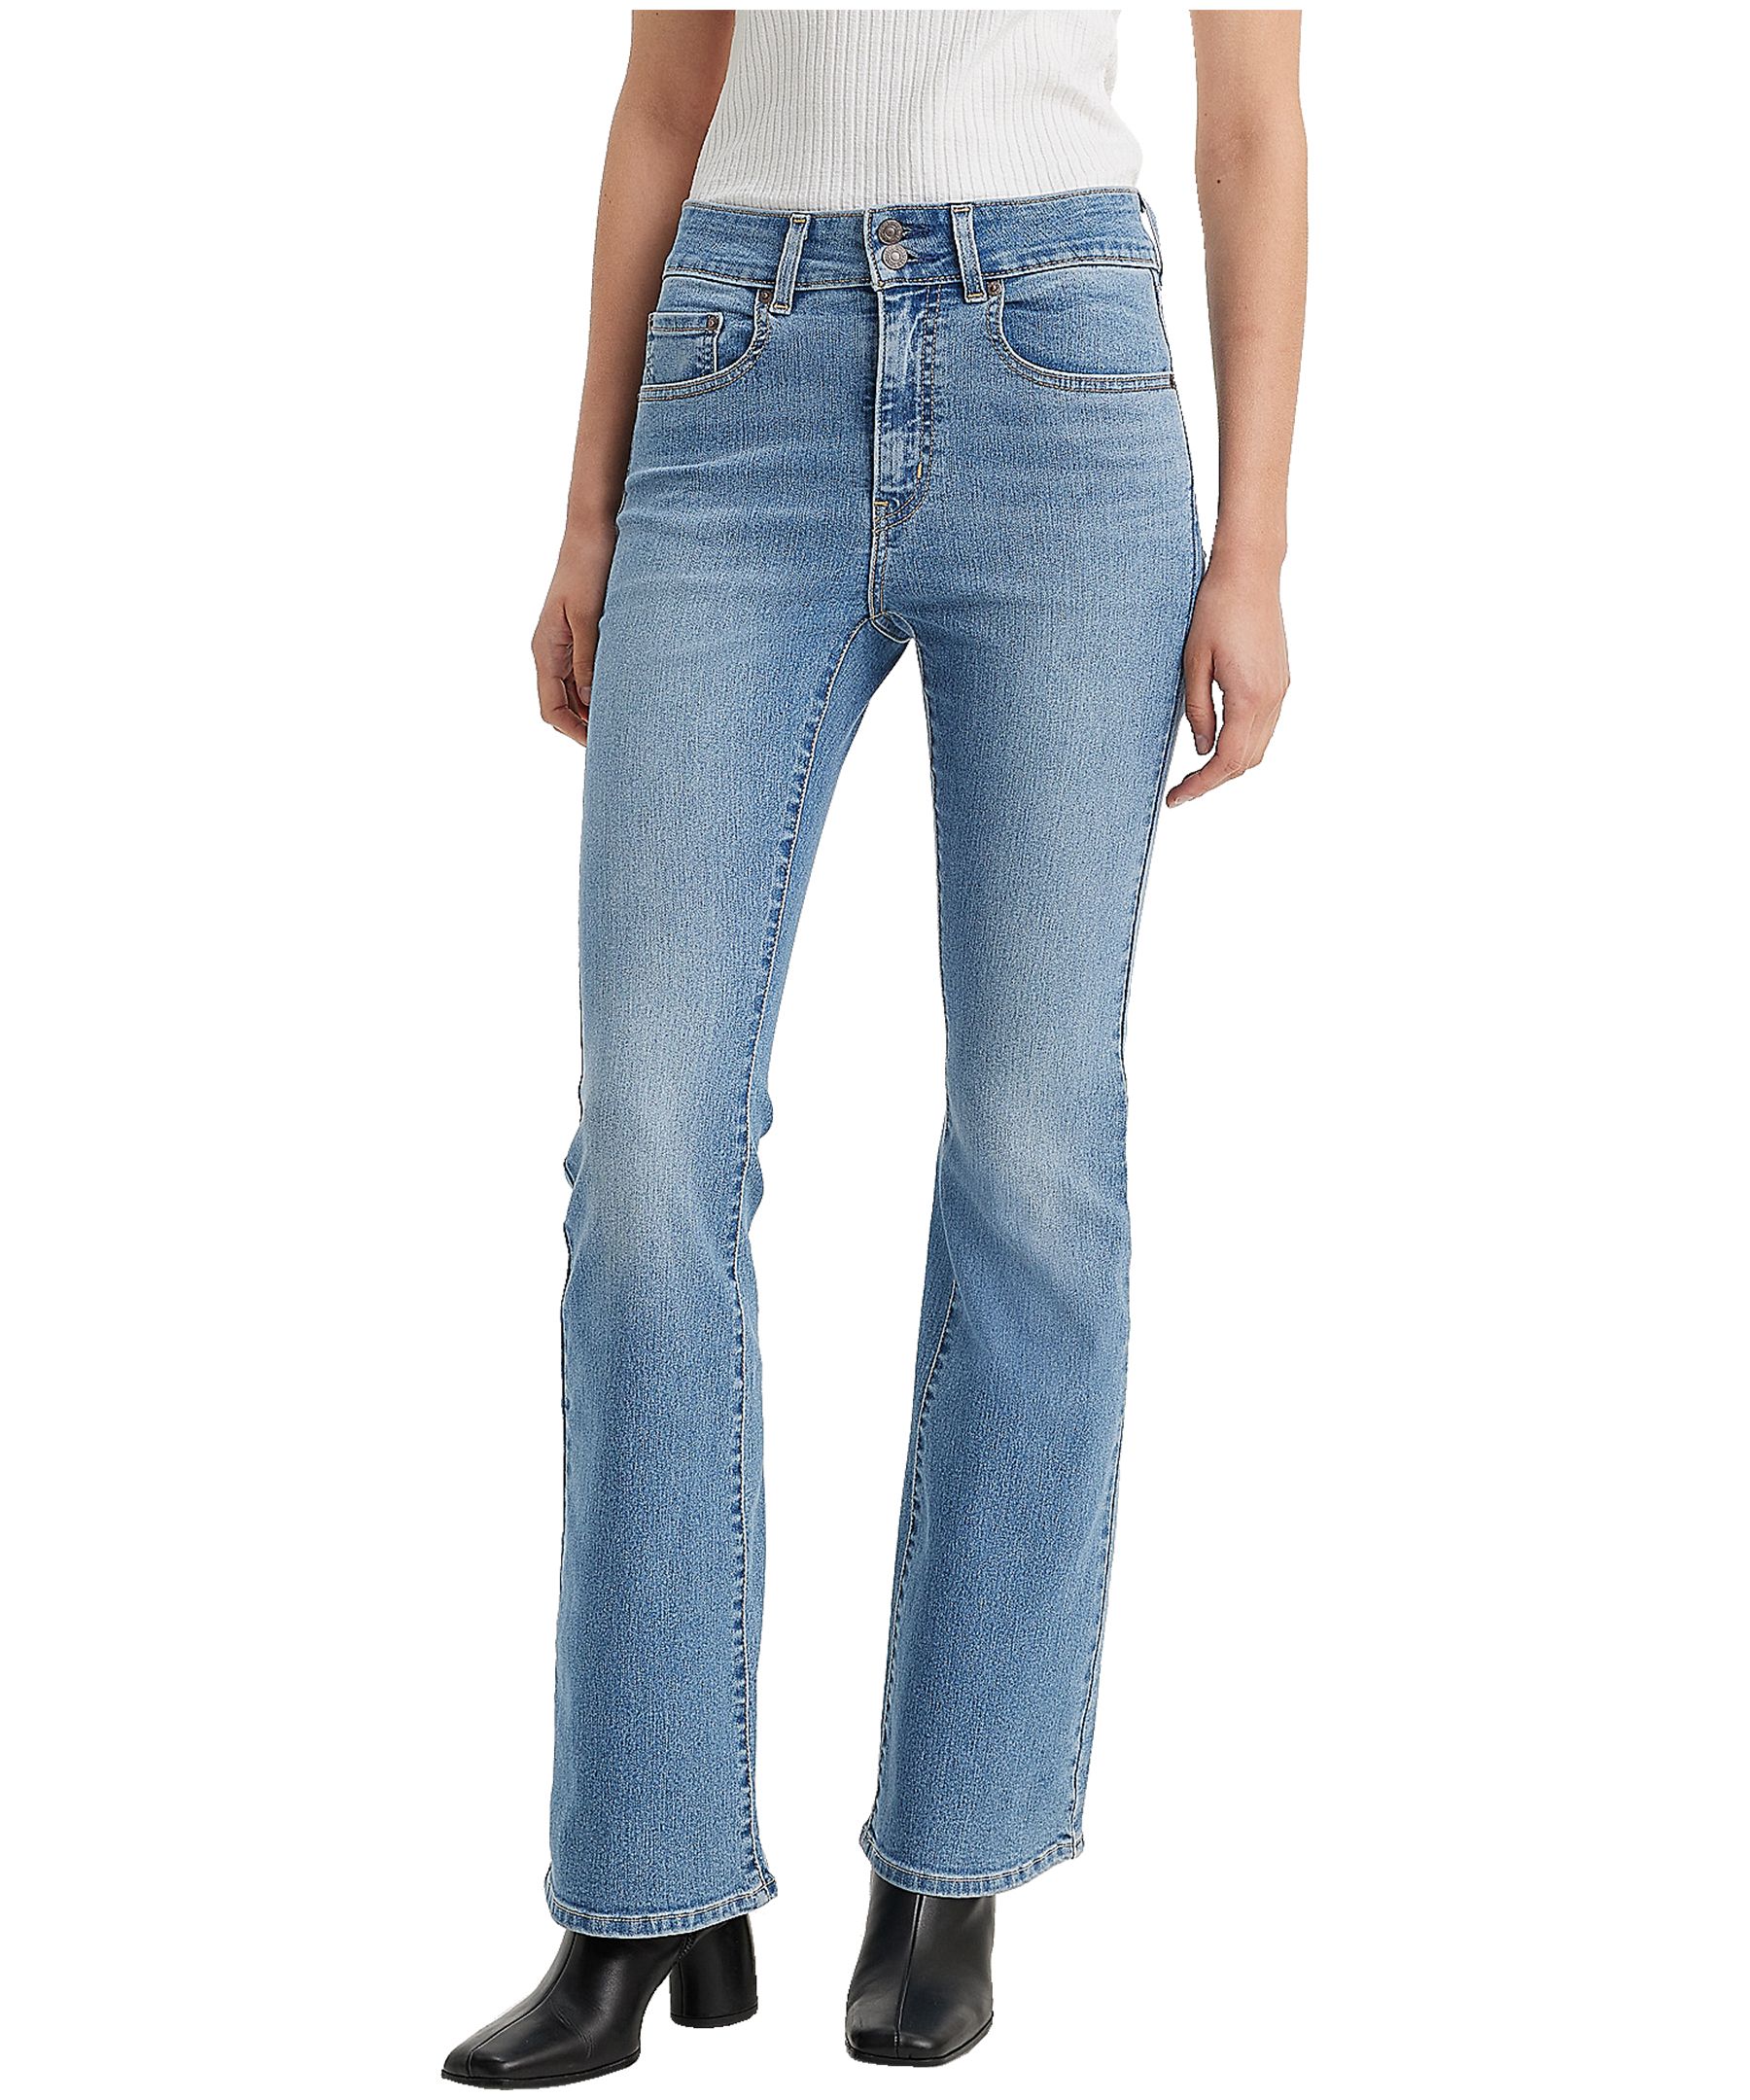 Levi's Womens 726 High Rise Slim Fit Flare Leg Jeans | Marks